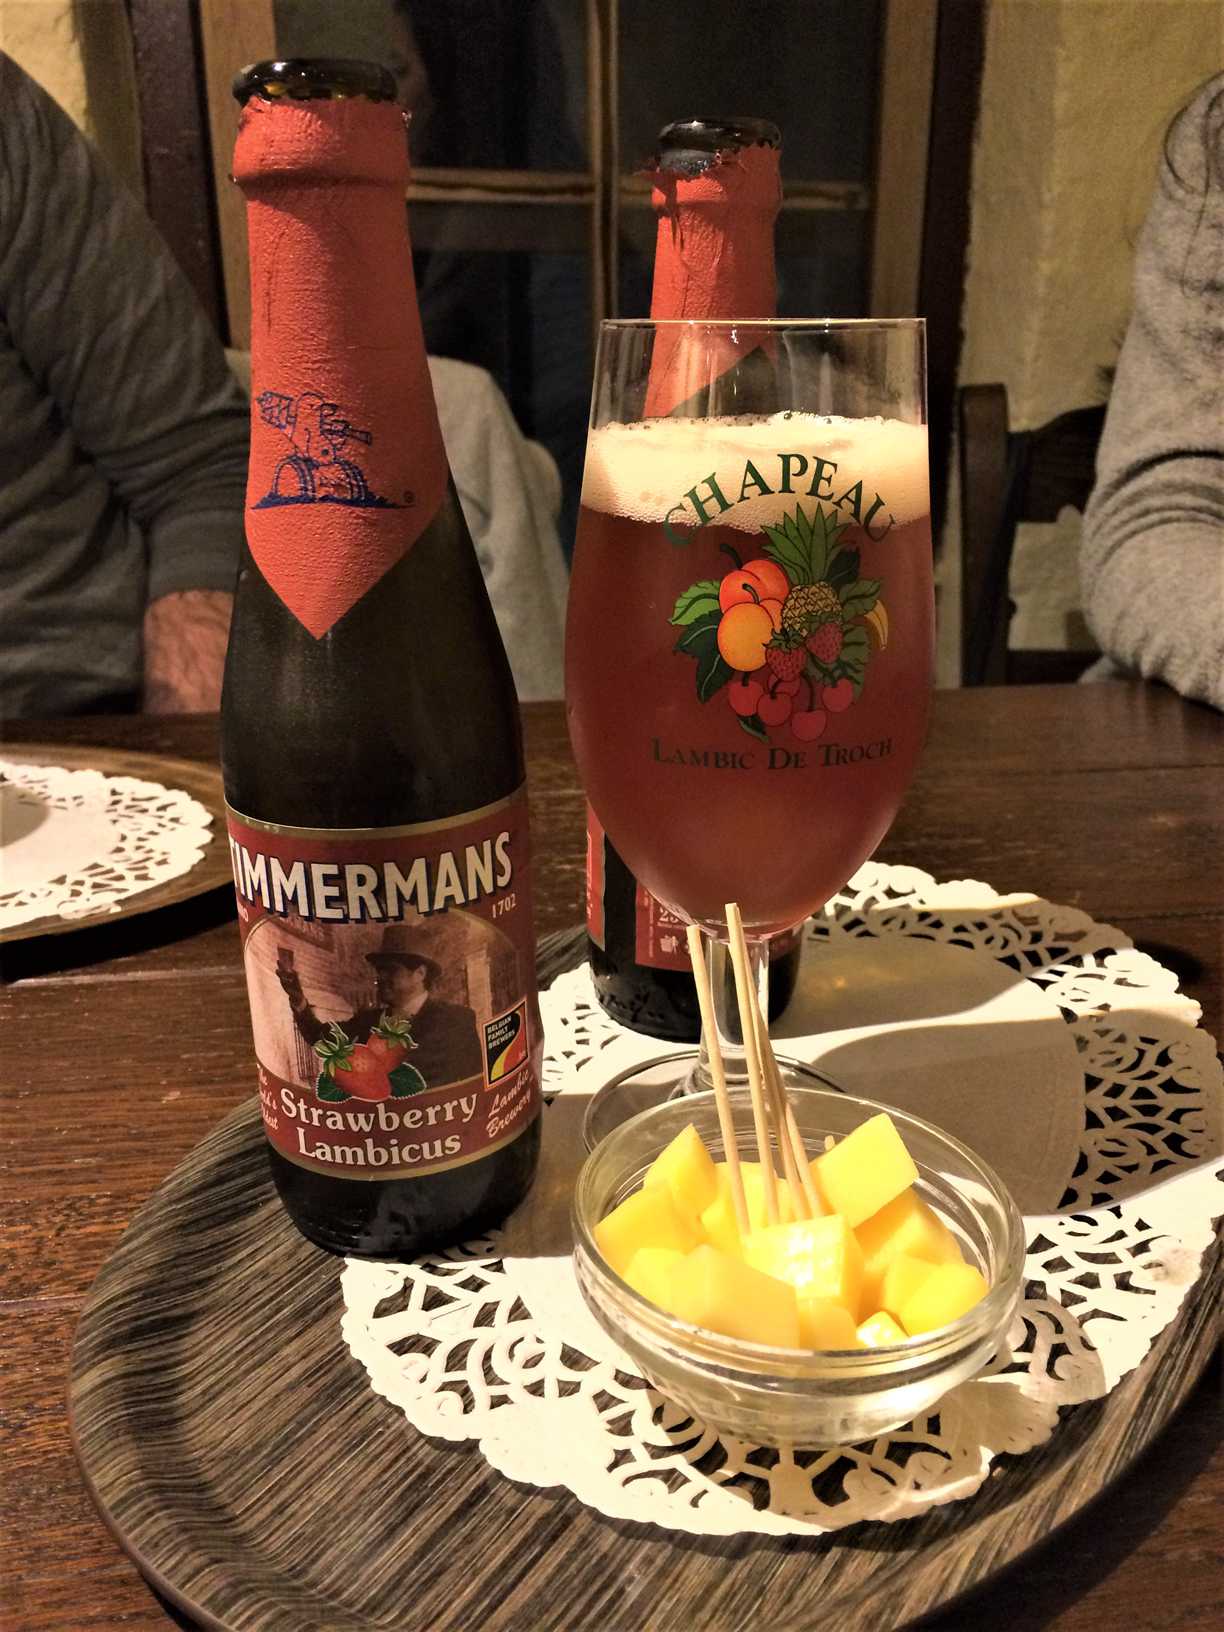 This picture shows two bottles of Zimmermans strawberry lambicus beer, a glass of beer, and a small bowl of cubed cheese with toothpicks sticking out.